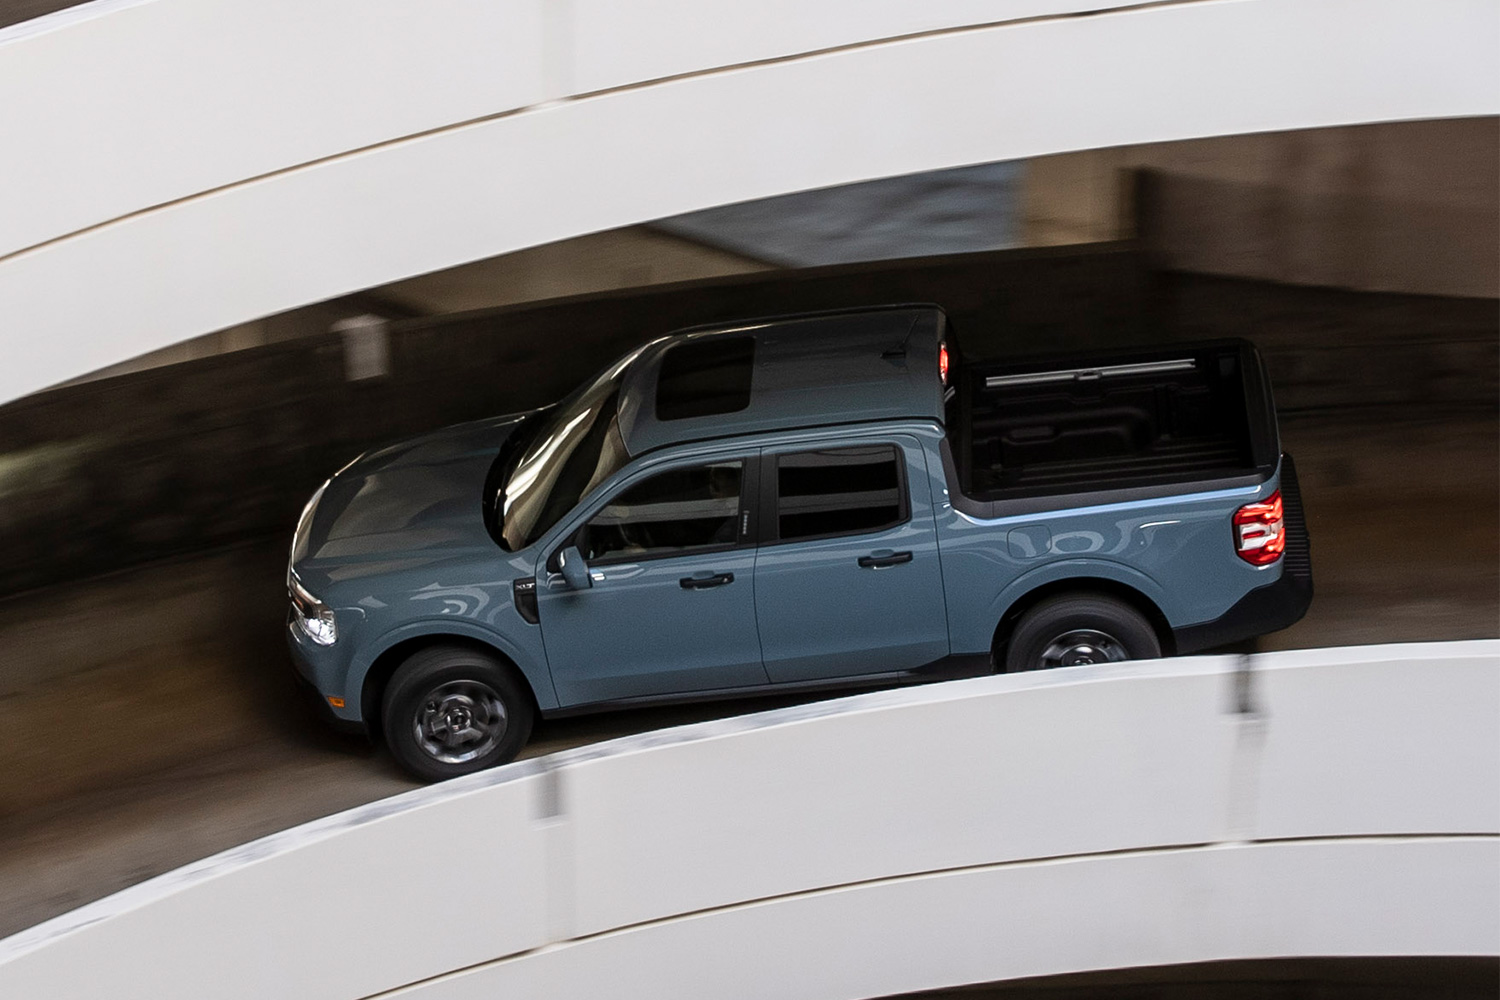 A Ford Maverick Hybrid driving down a parking garage ramp. We dig into why this pickup truck is being ignored by most Americans, despite it being near-perfect.